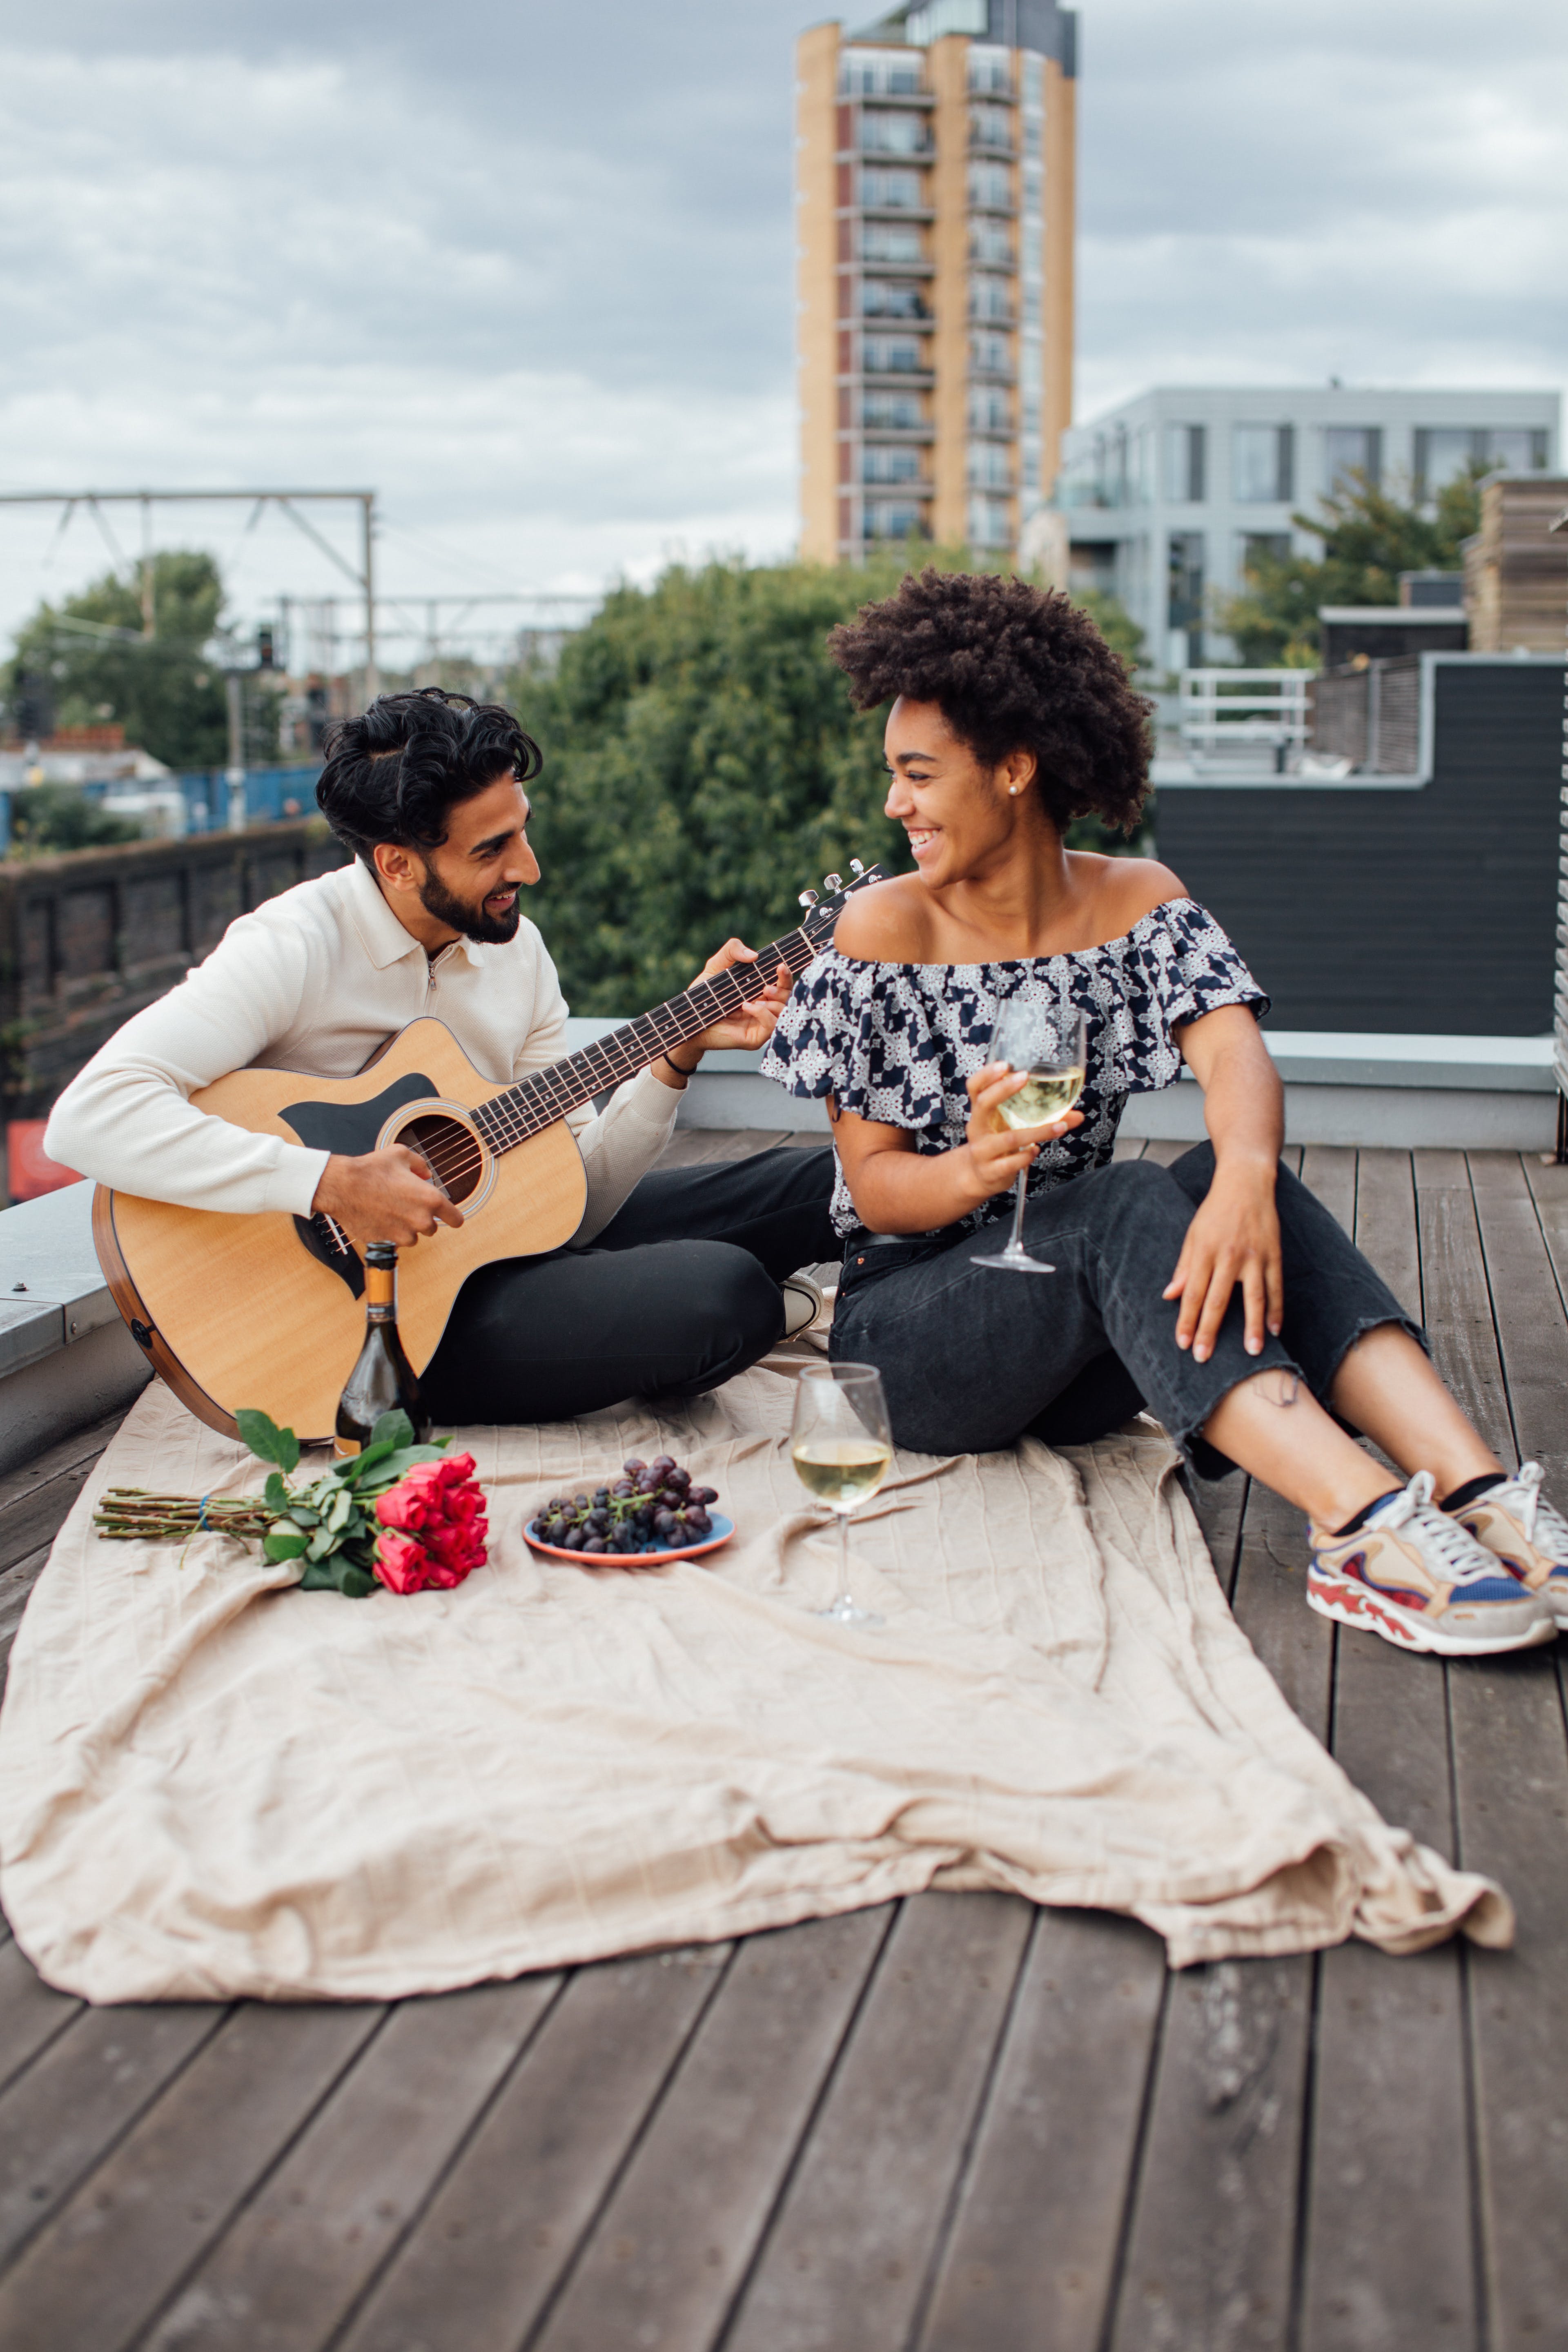 Sitting on a rooftop celebrating V-day in Nashville https://www.pexels.com/photo/man-and-woman-sitting-on-the-rooftop-5332423/ 